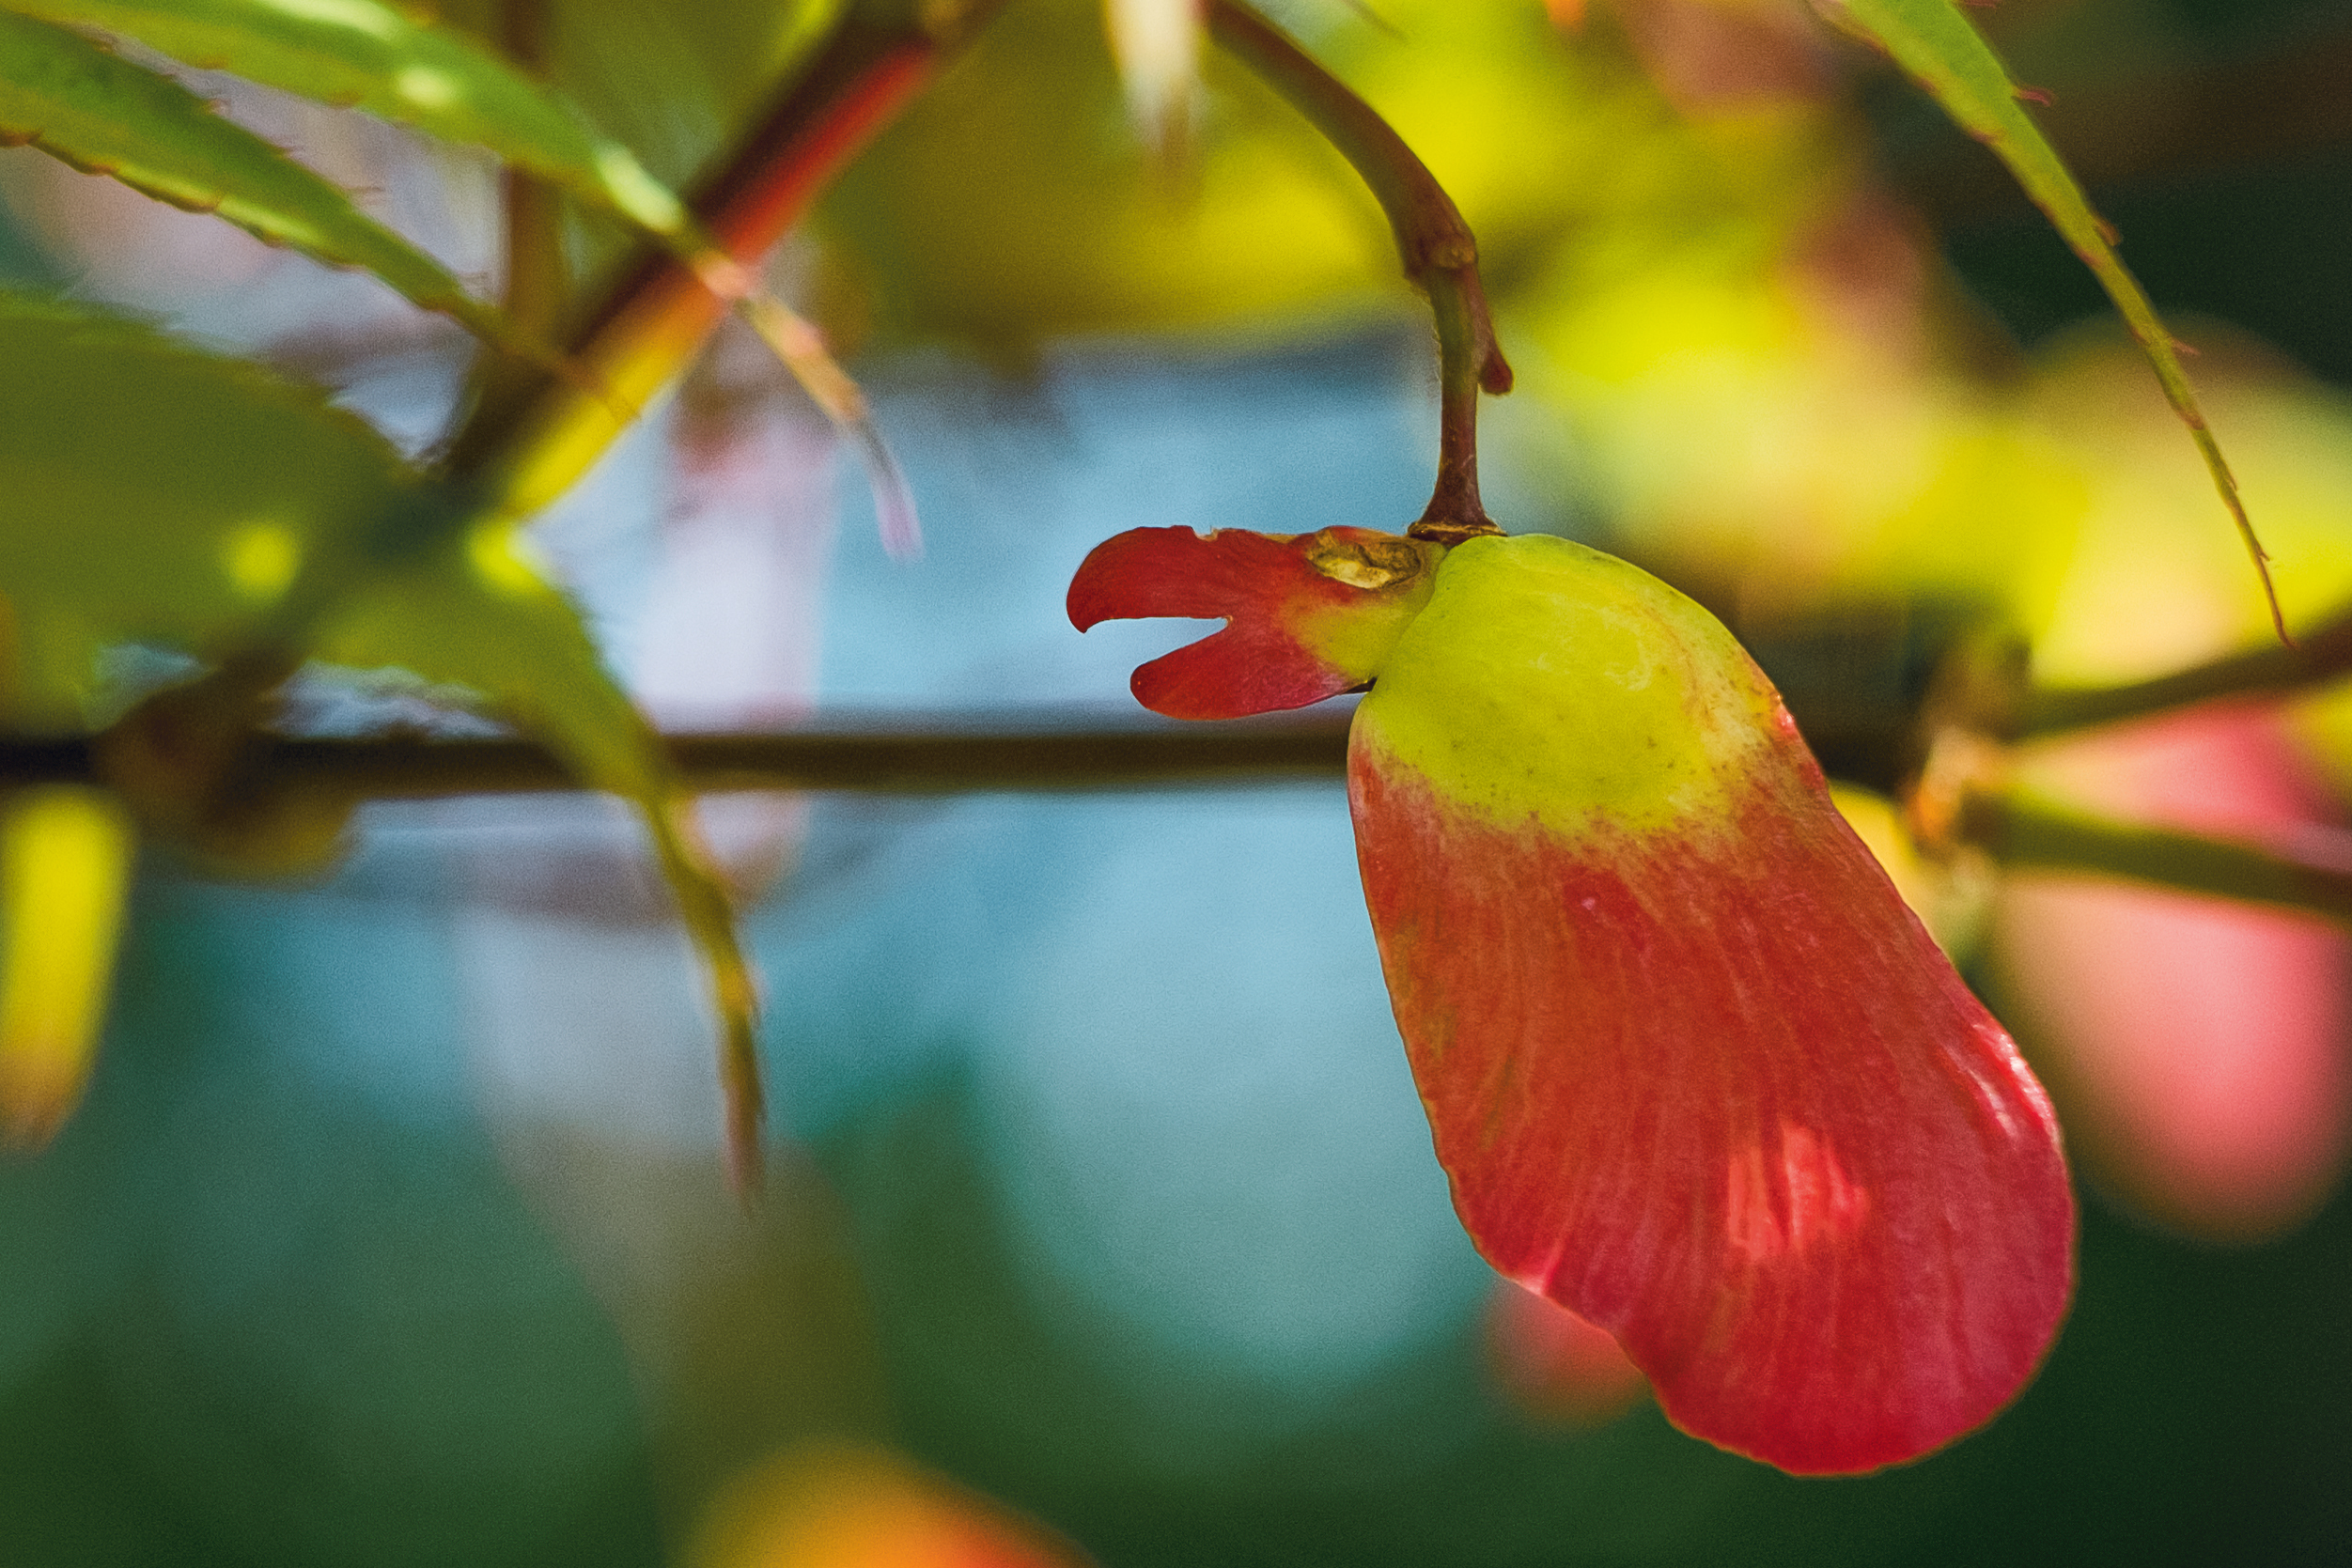 What image do you see in this colorful photograph? A red and yellow tropical bird poses in a maple leaf blossom.